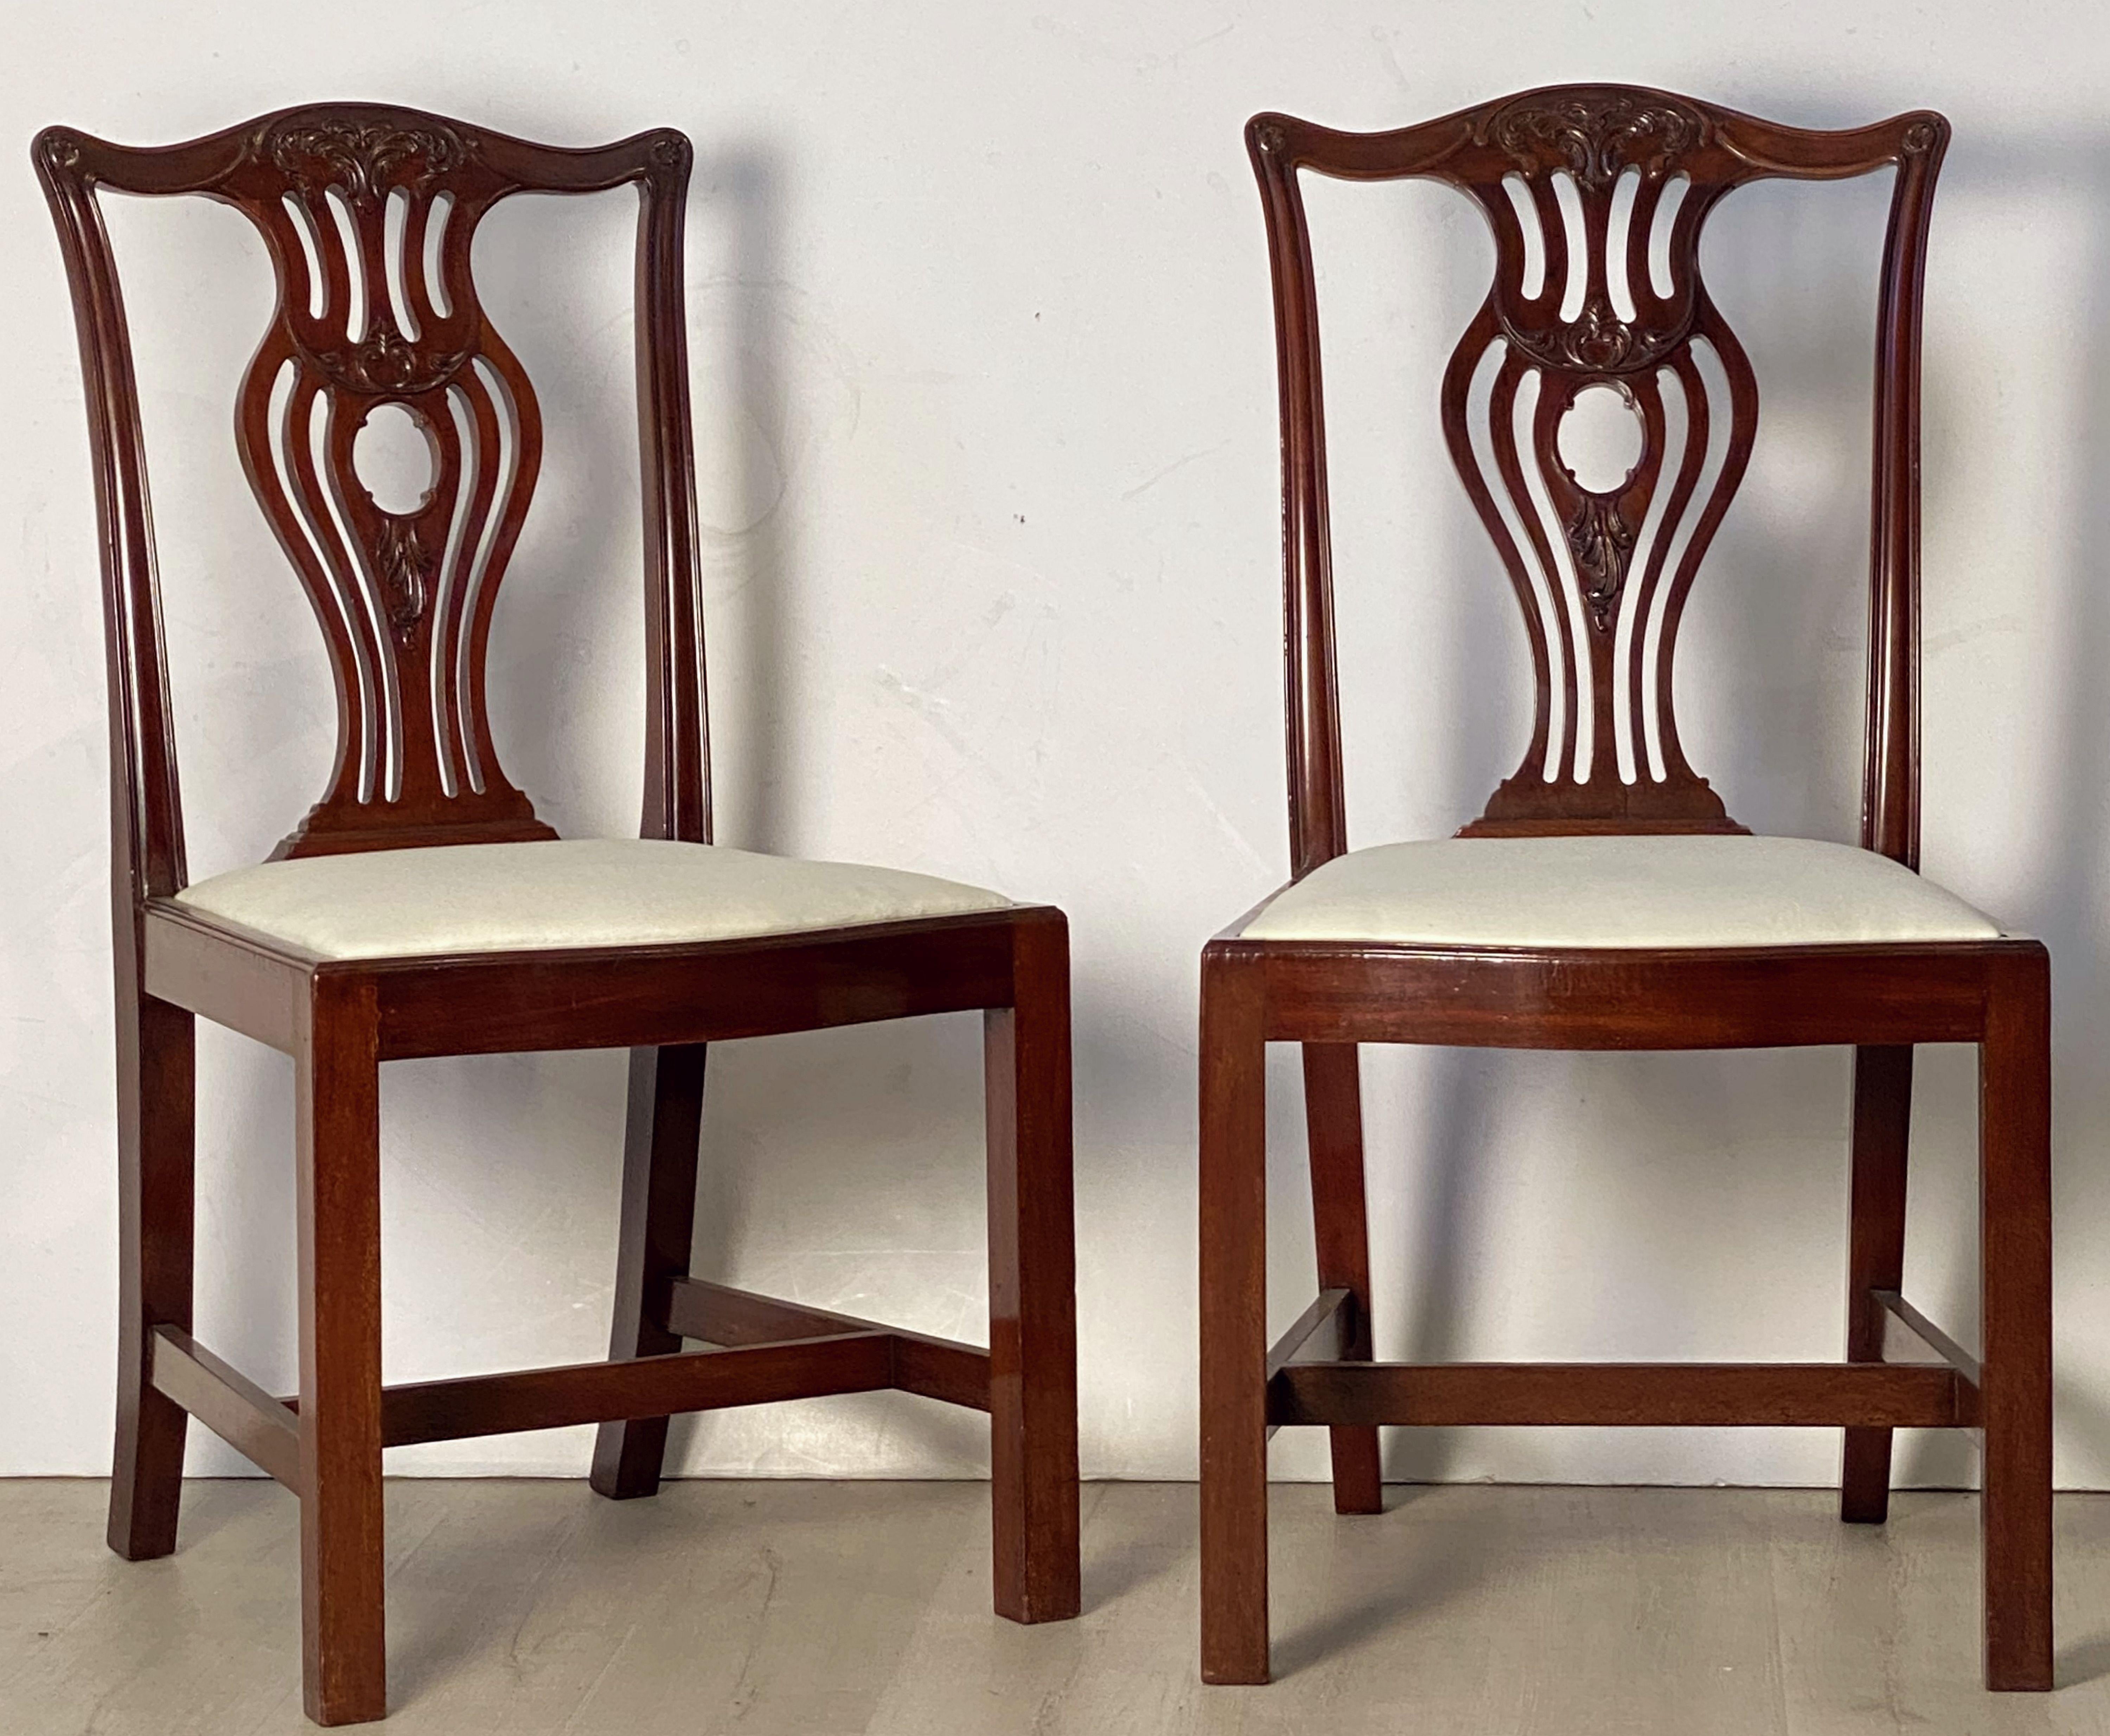 A handsome set of six English dining chairs of mahogany in the Art Nouveau style.
Each chair featuring a carved mahogany back and a comfortable upholstered seat.

Seats are removable.